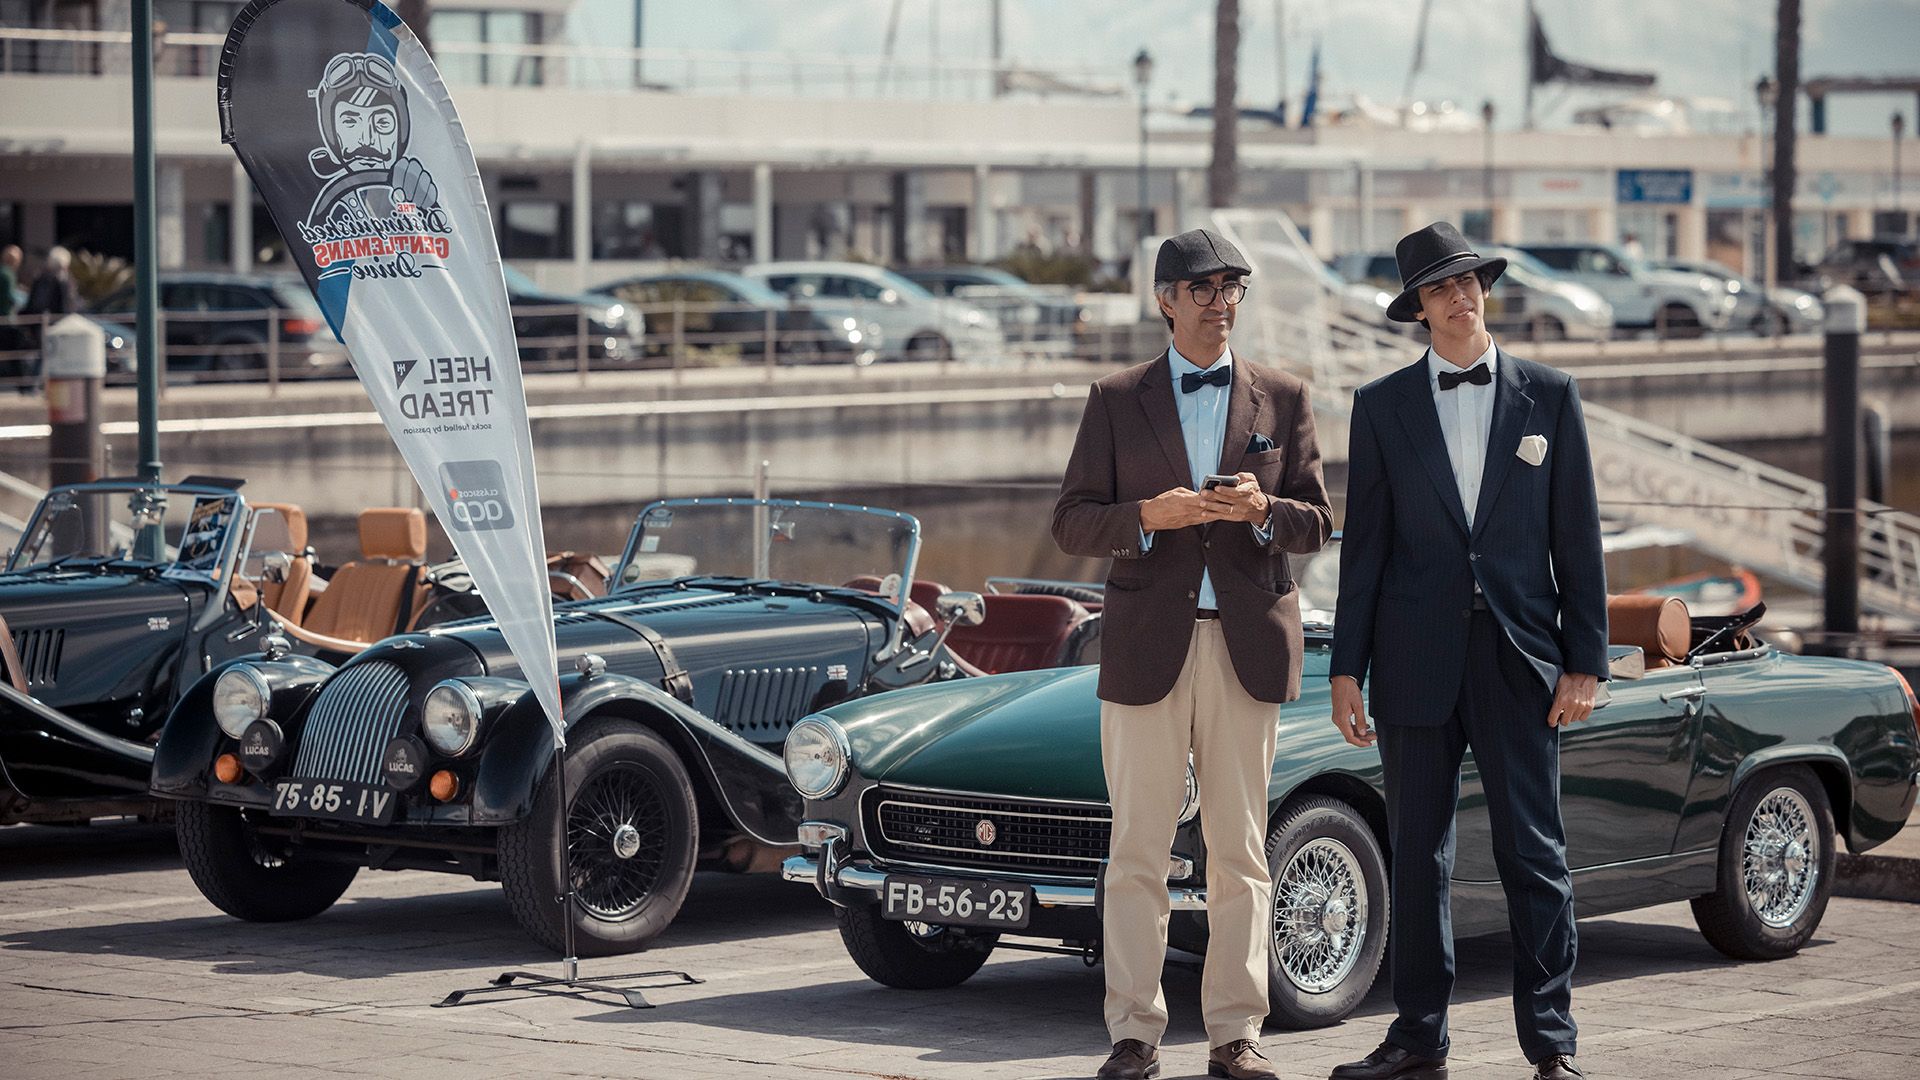 Two superbly dressed men in dapper outfits pose in front of classic cars.